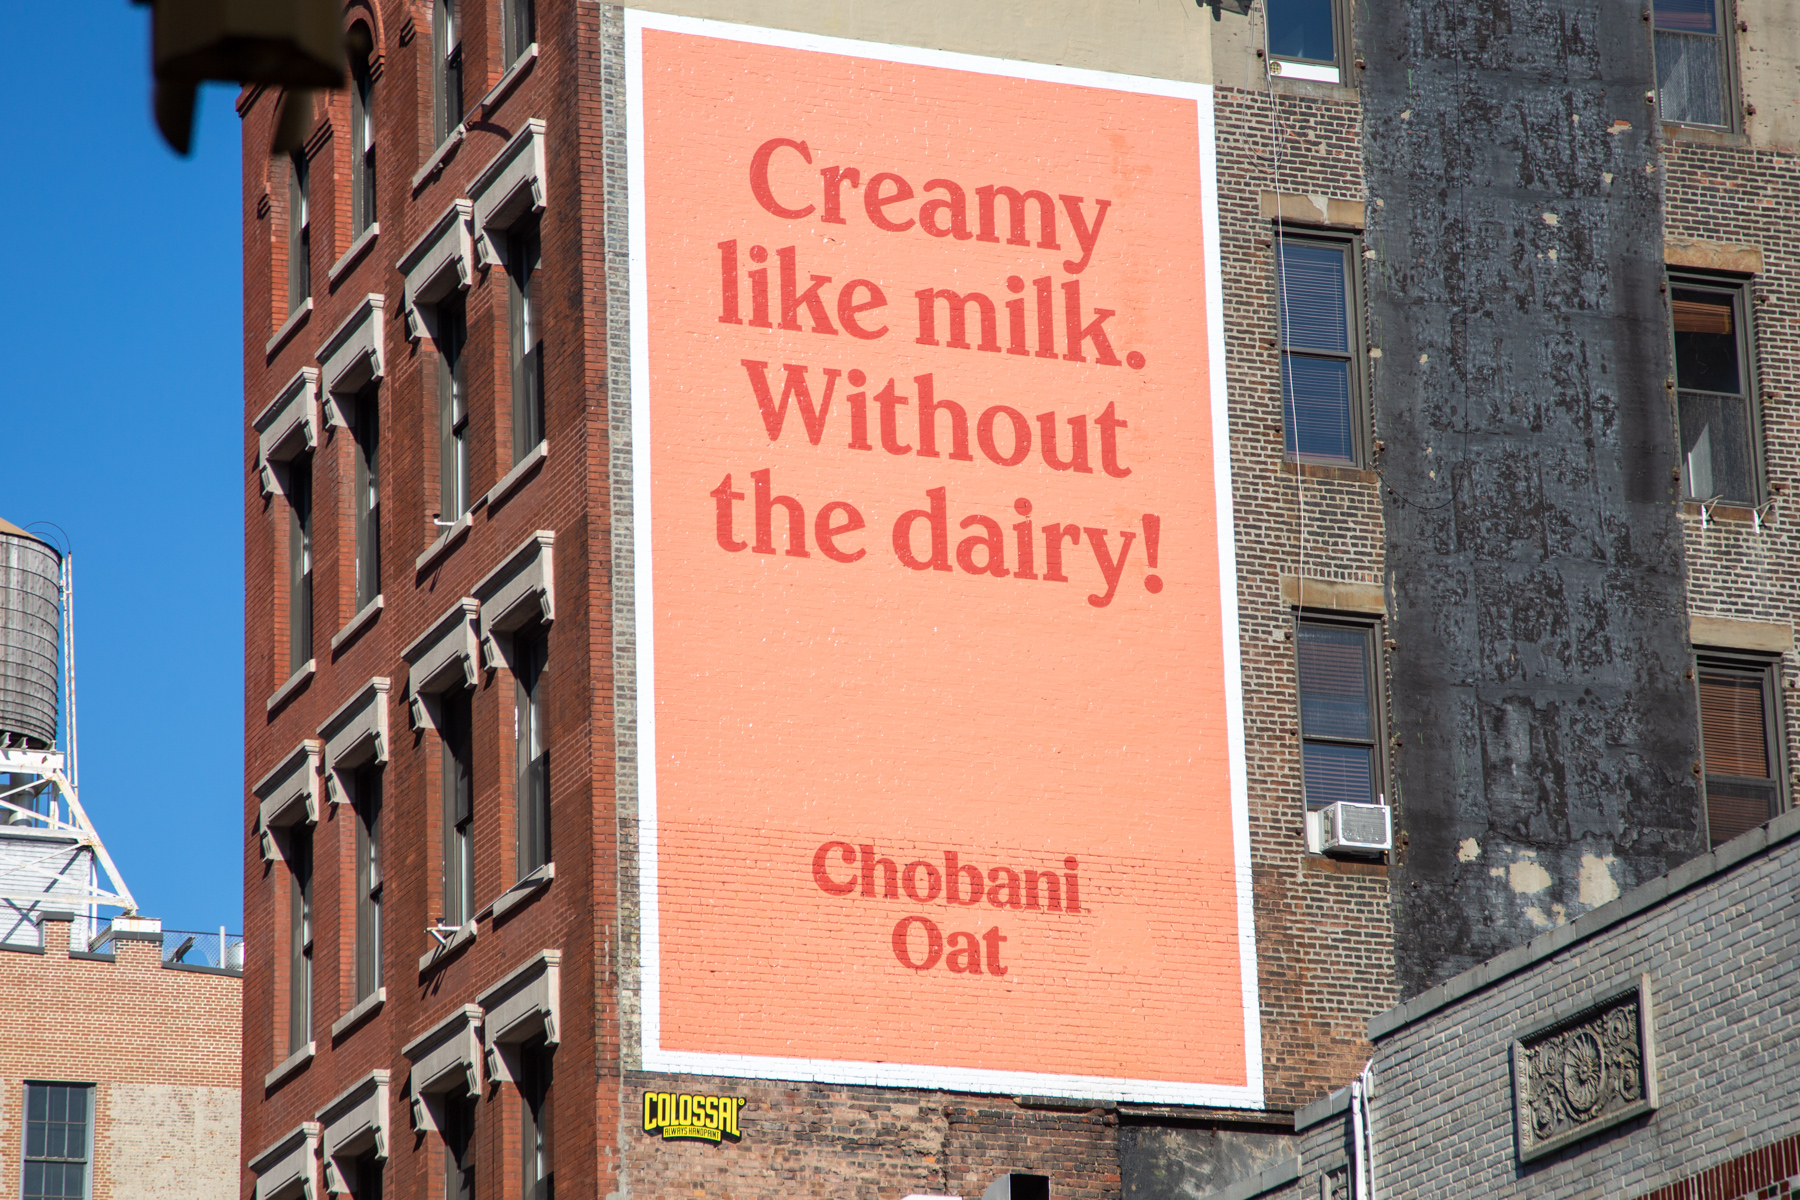 Chobani hand painted mural by Colossal Media